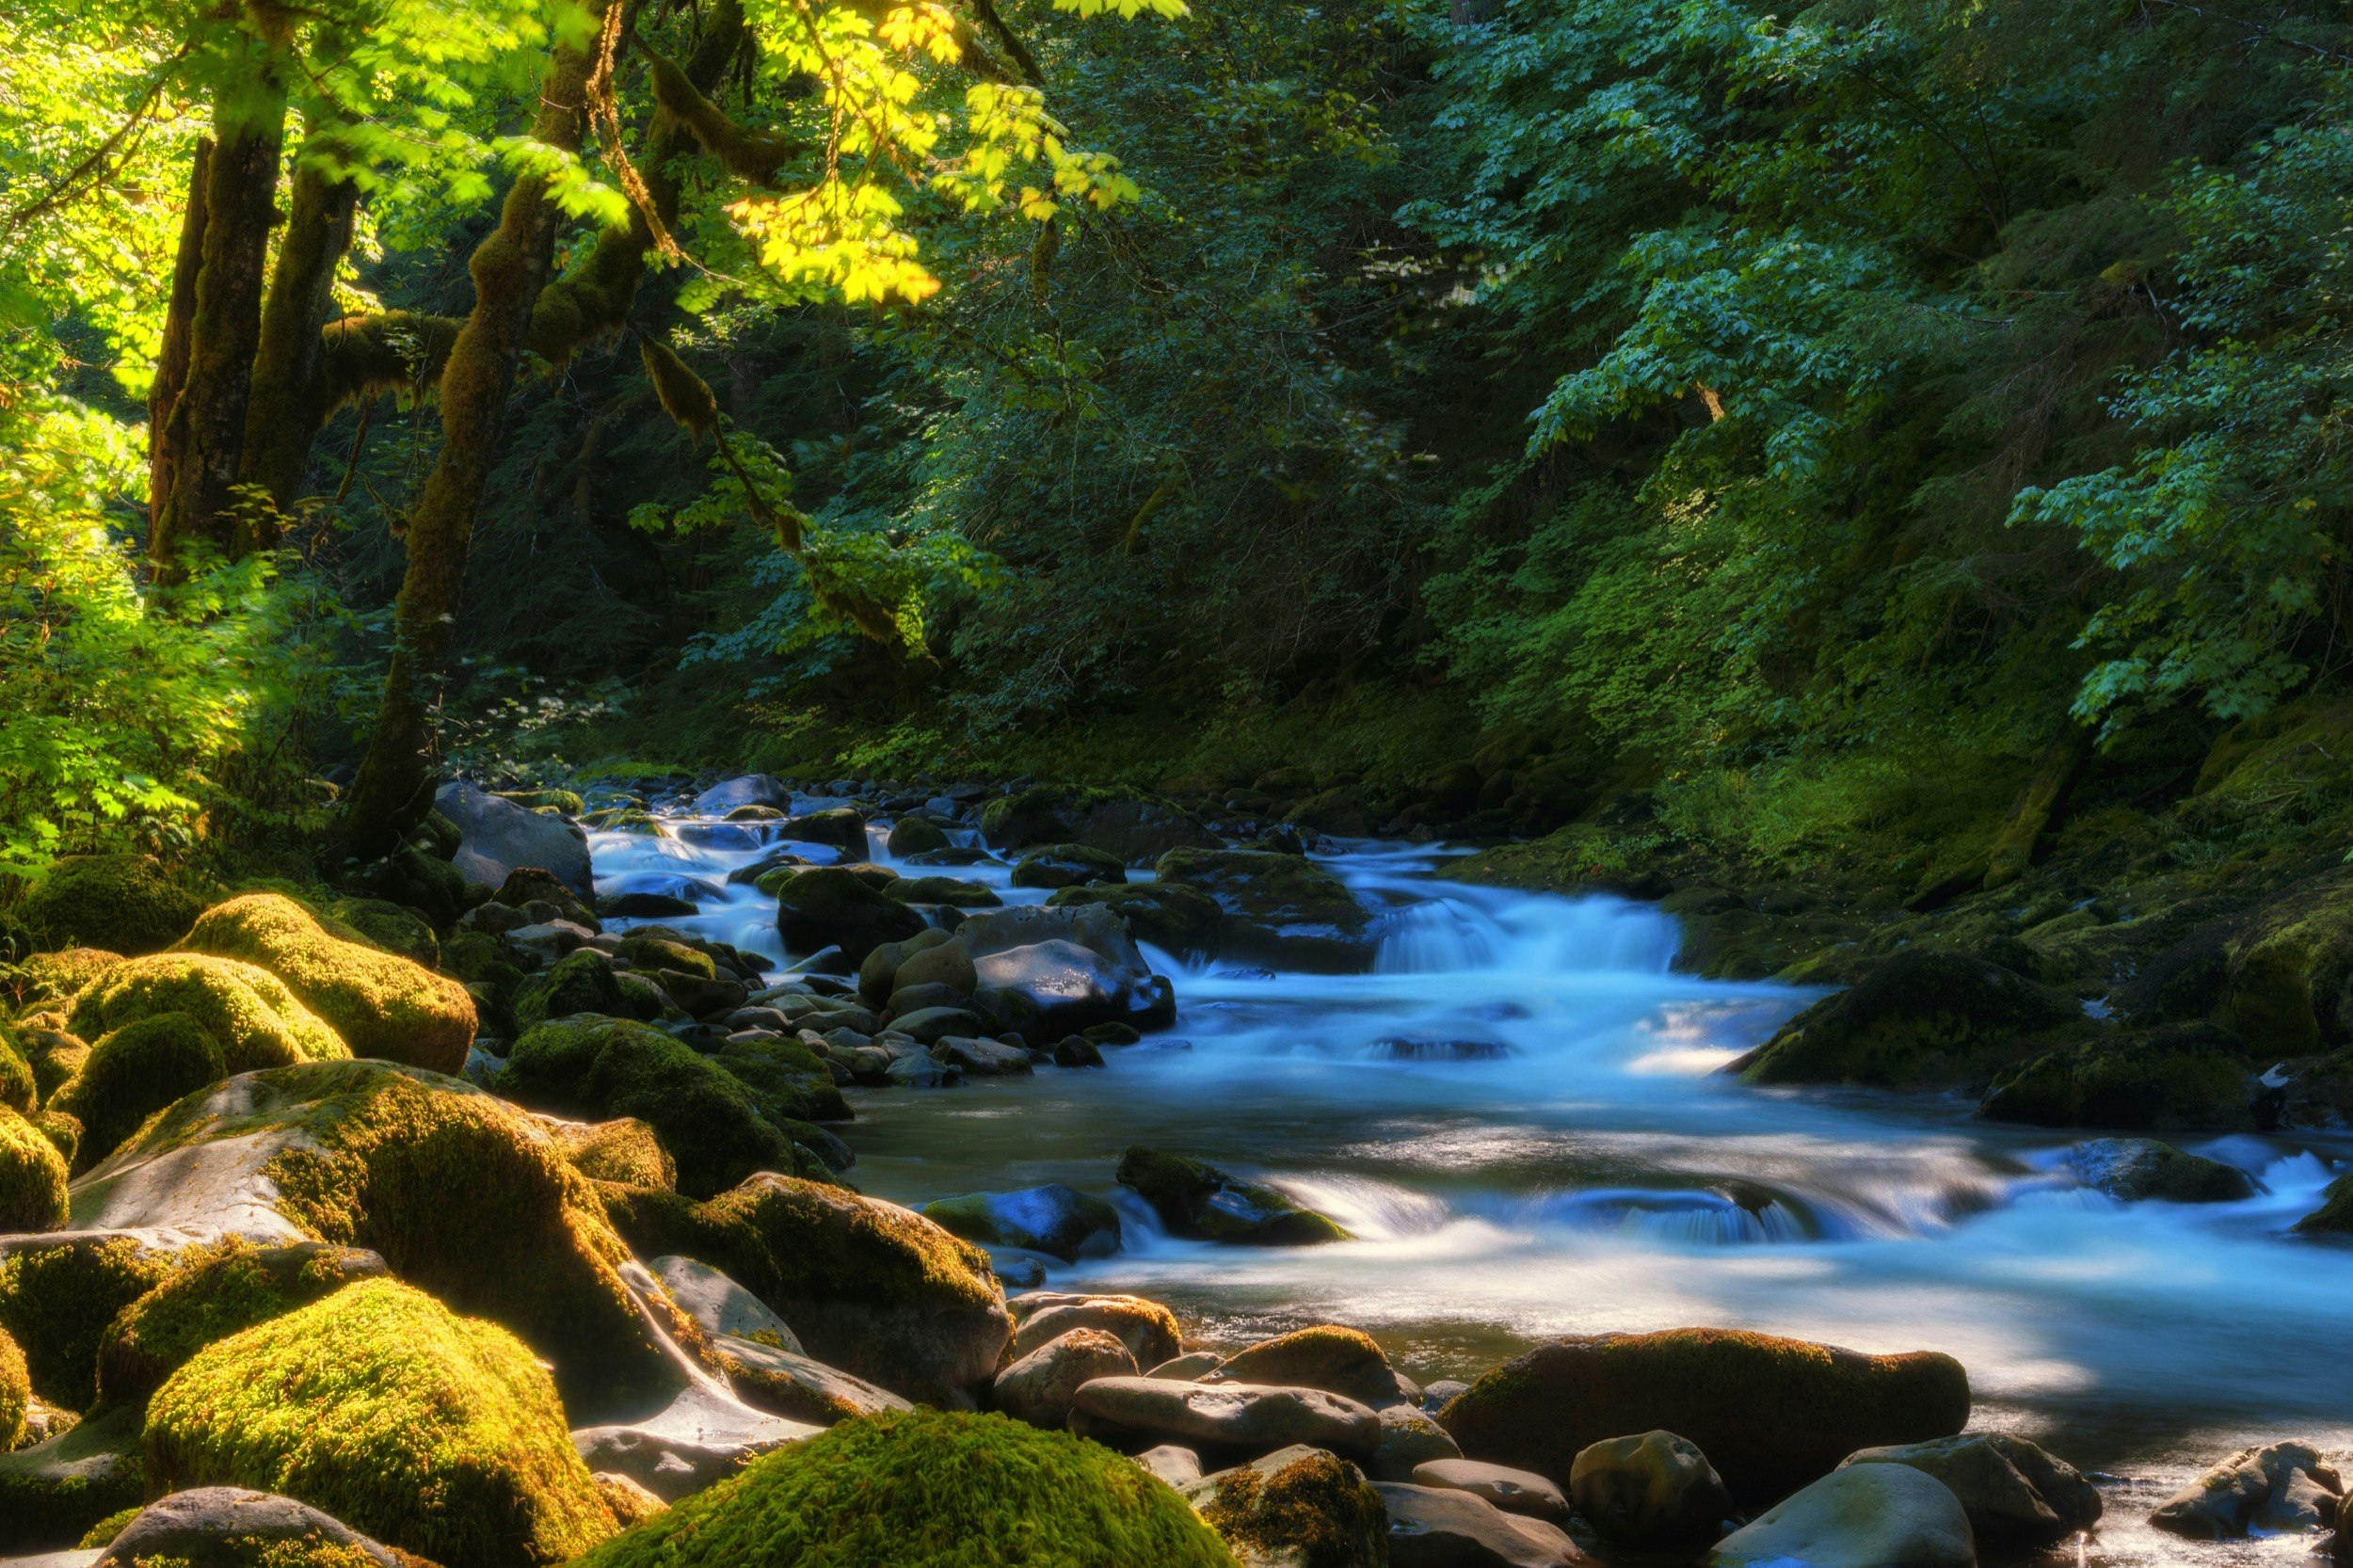 A river tumbles over boulders that fill the riverbed surrounded by a thick forest in Oregon